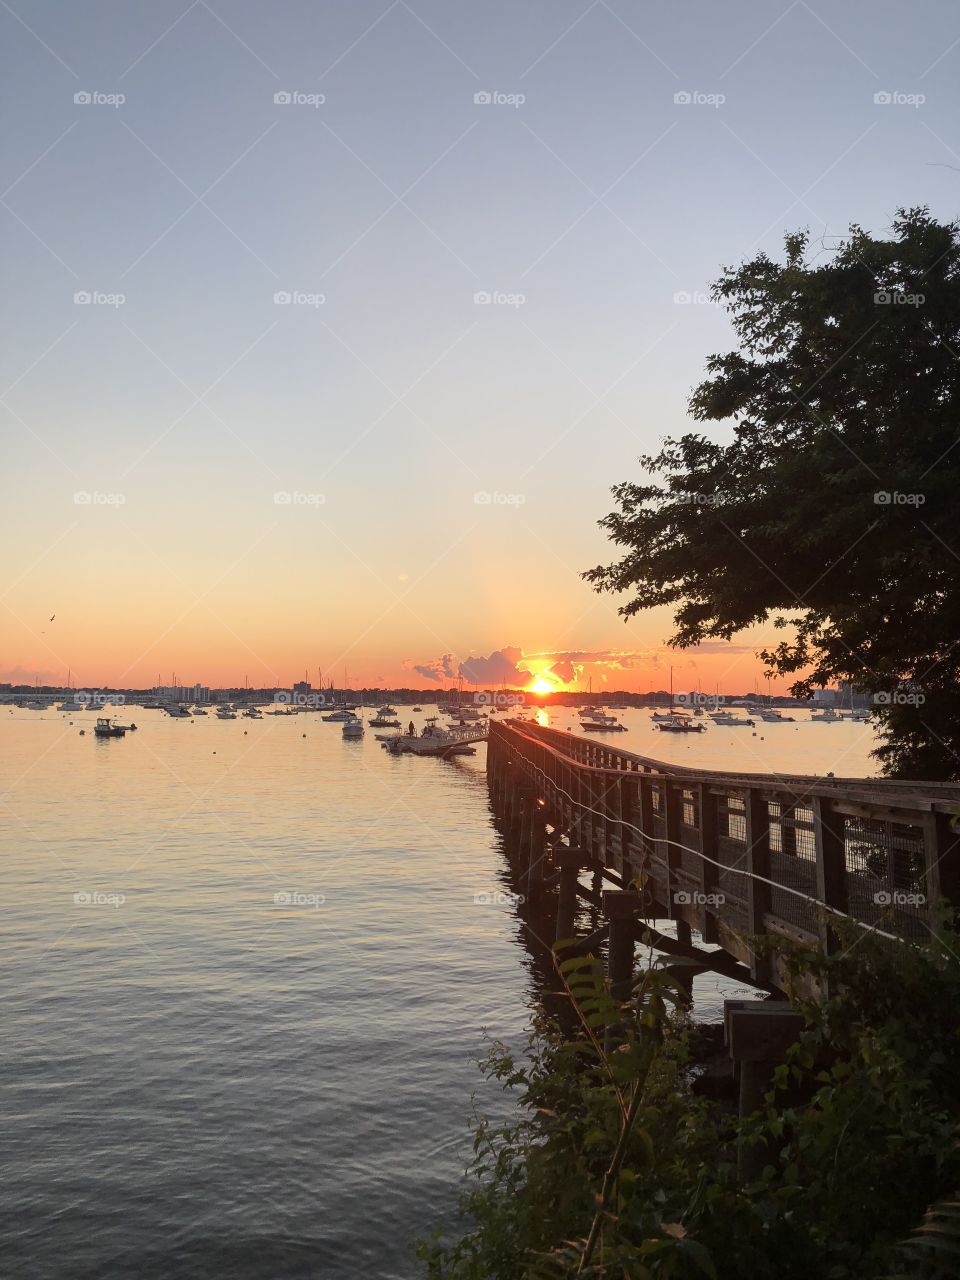 Summer sunsets and romantic picnics by the harbor